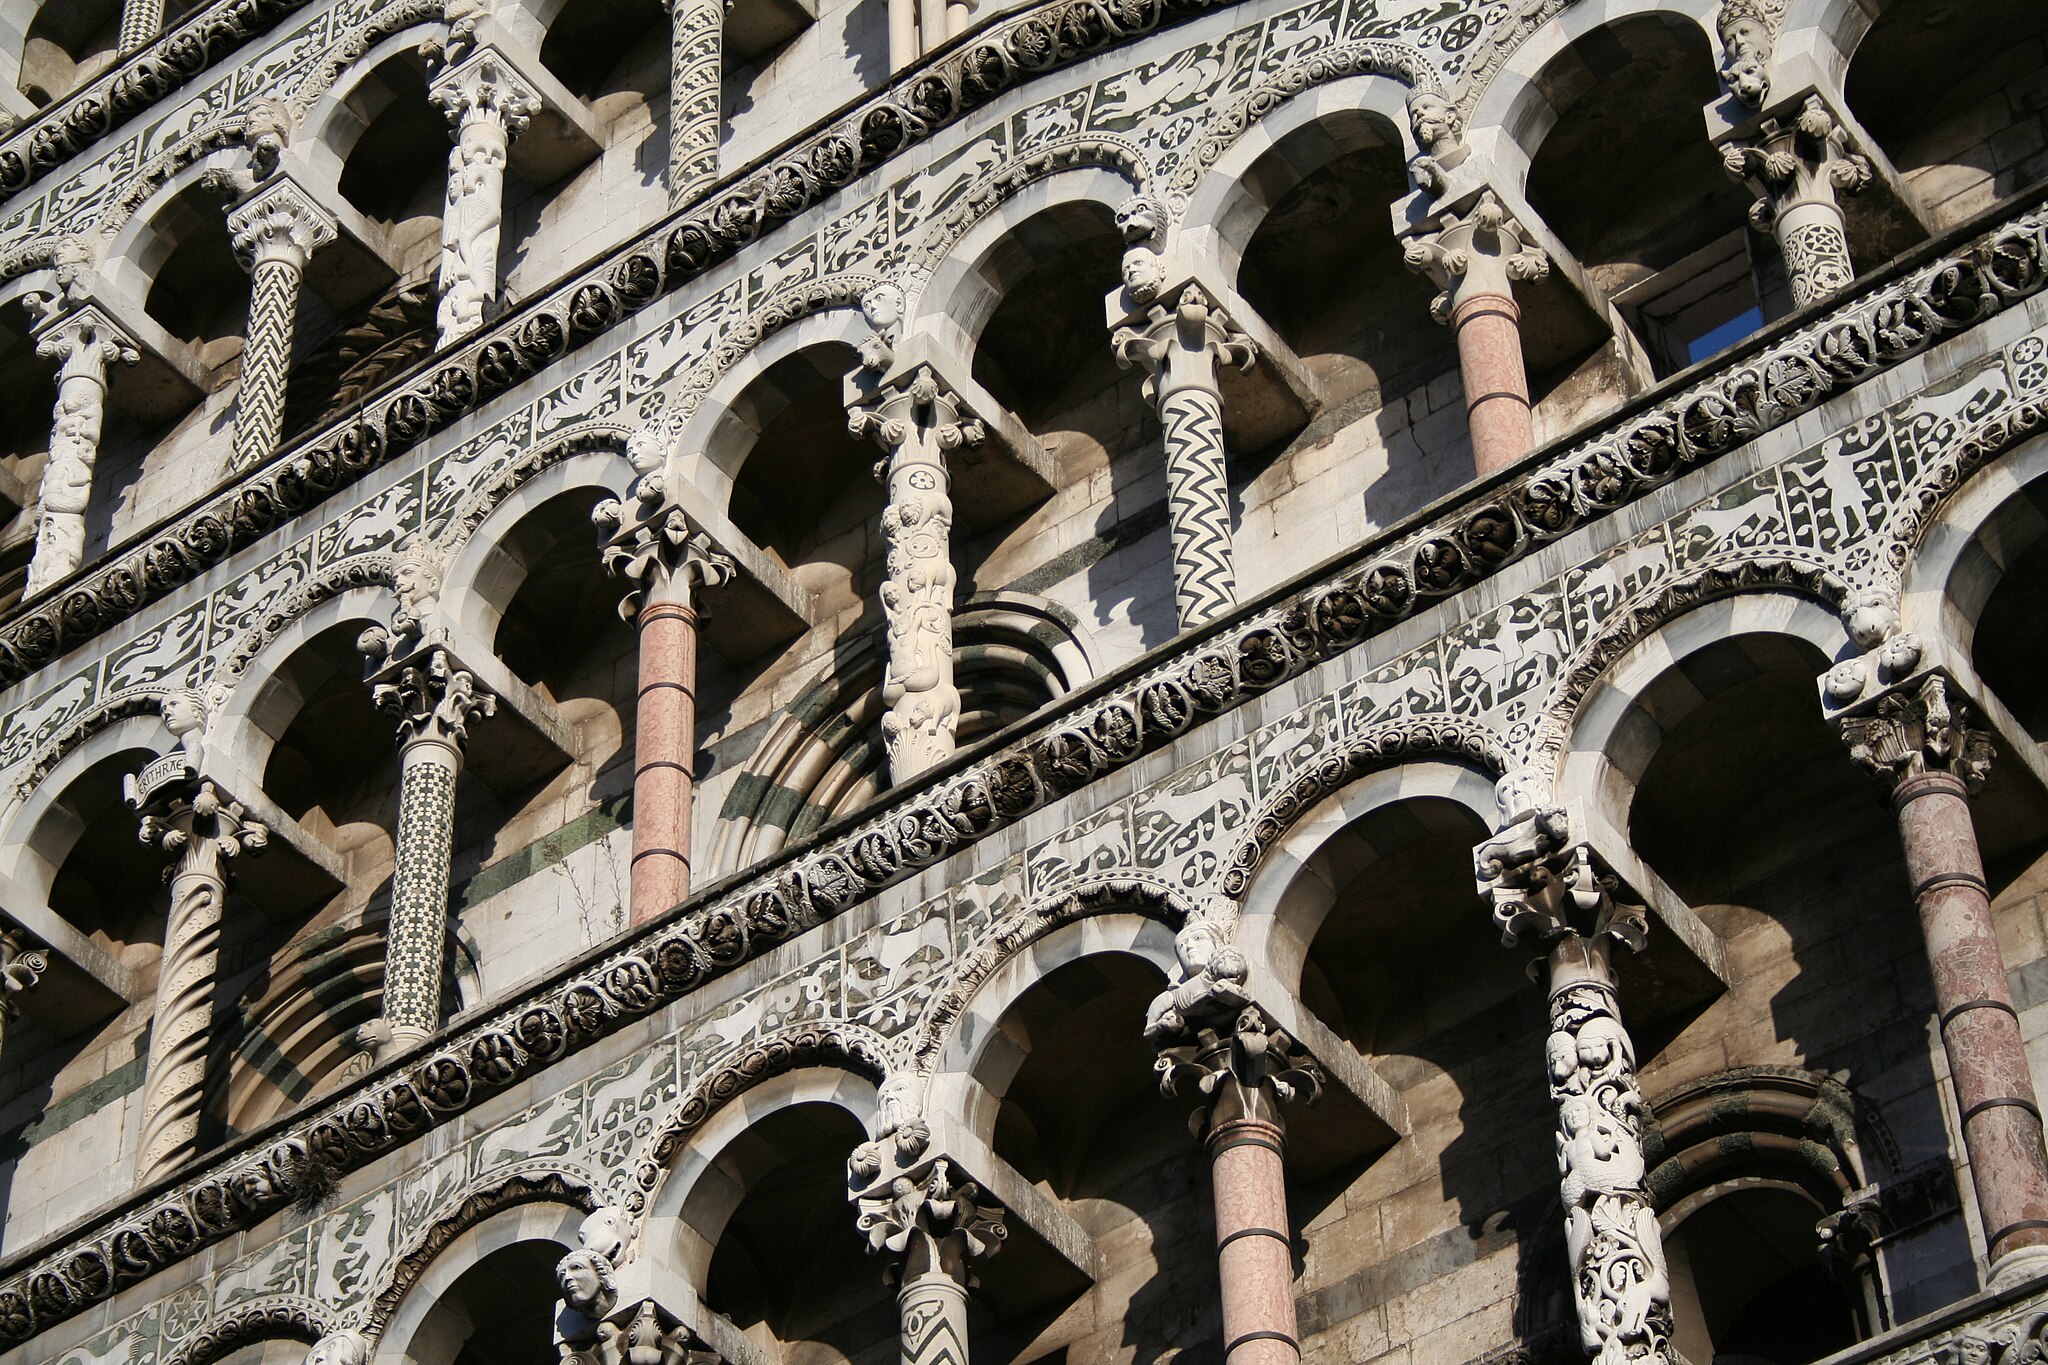 the pillars of the front facade of the San Michele in Foro church in Lucca